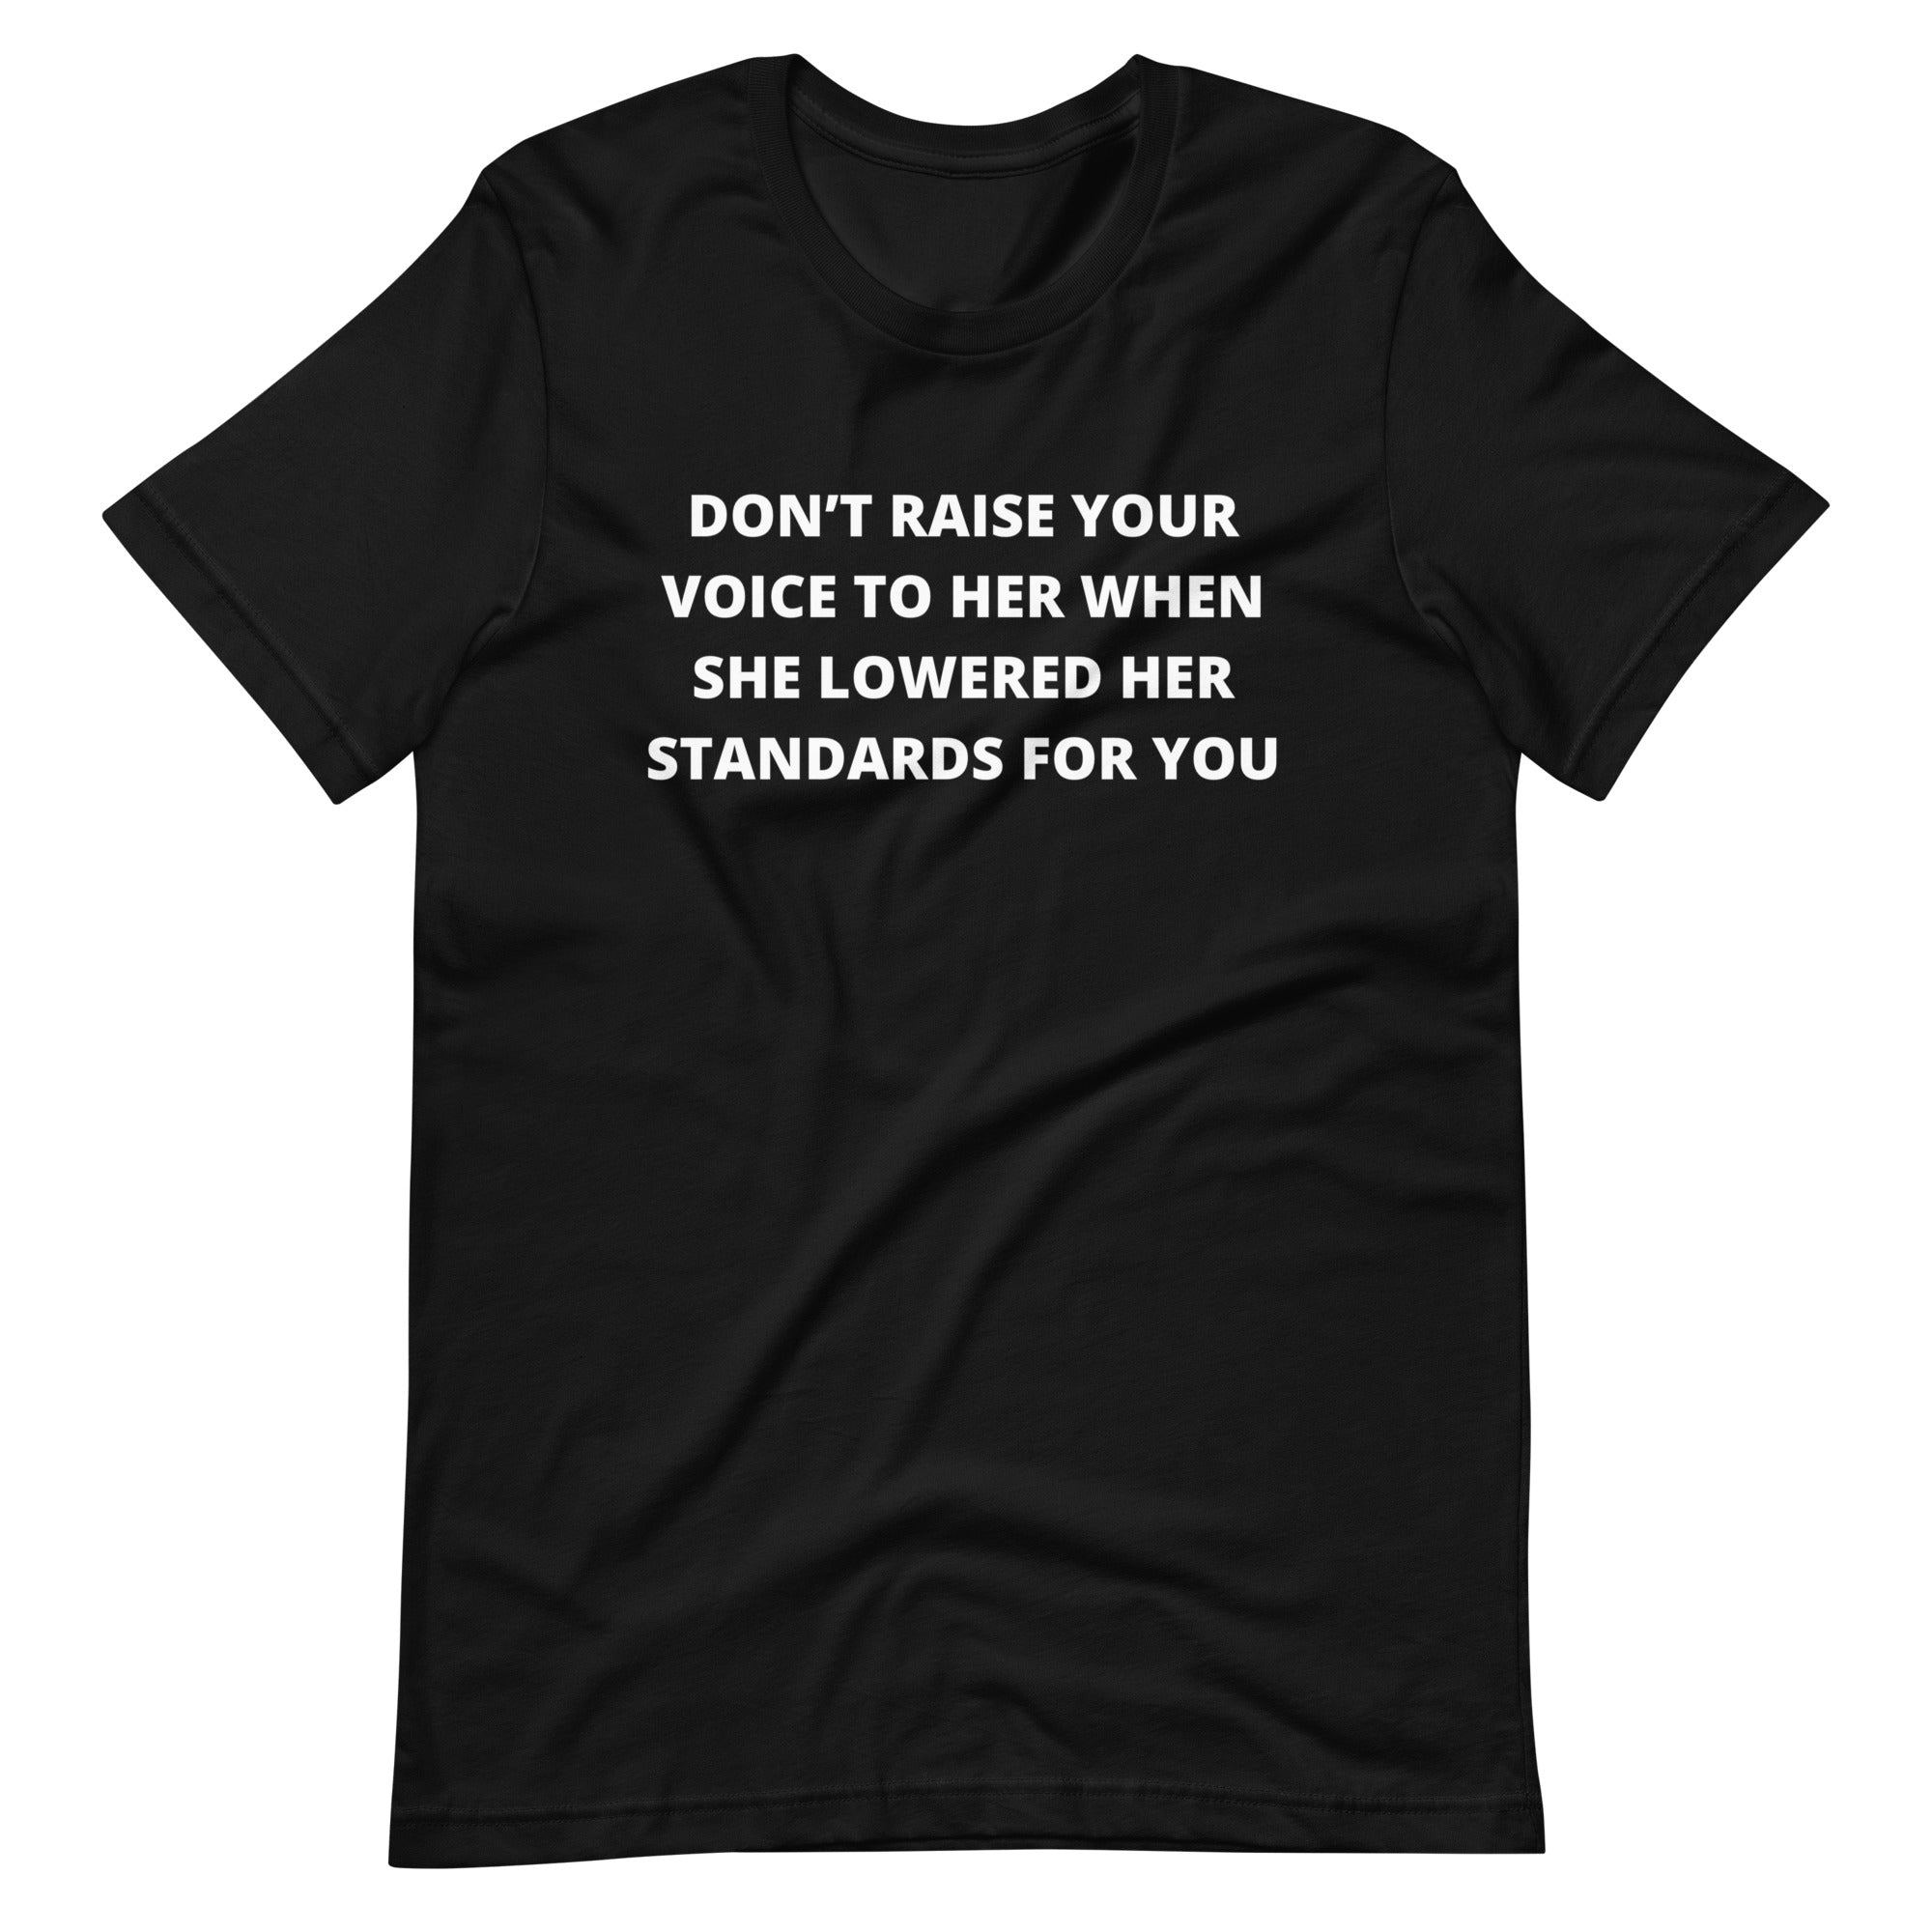 Don’t Raise Your Voice To Her When She Lowered Her Standards For You Unisex Feminist T-shirt - Shop Women’s Rights T-shirts - Feminist Trash Store - Black